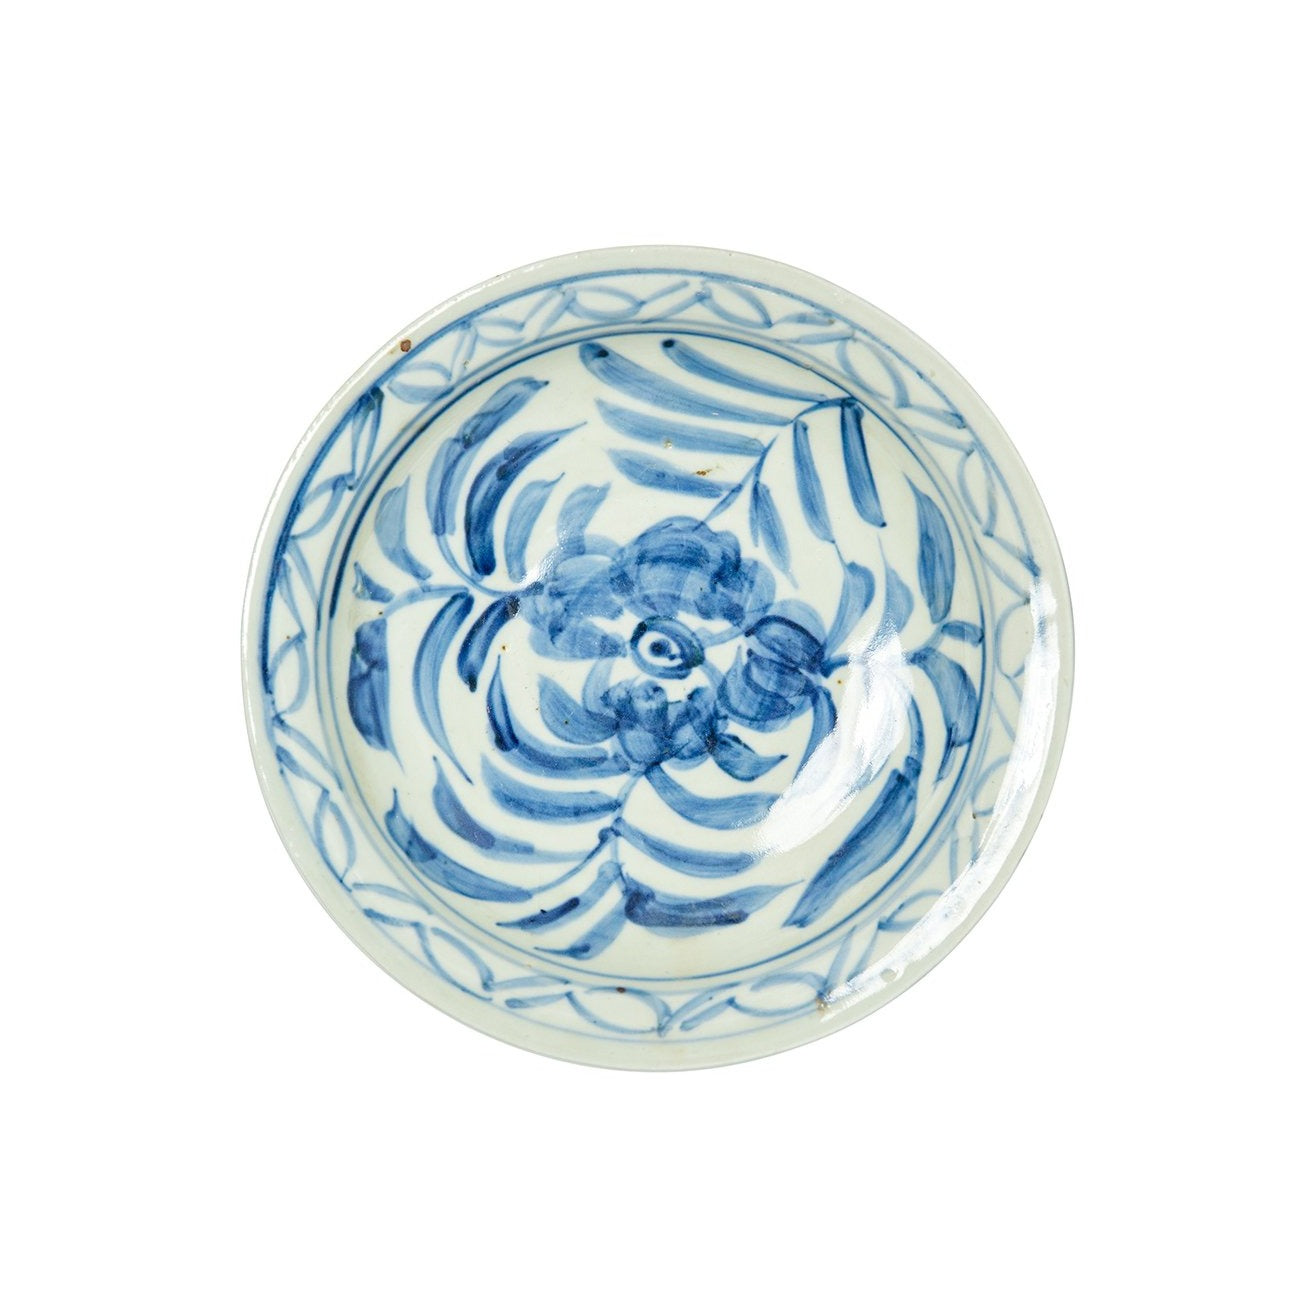 Blue and White Plate, Peony Print